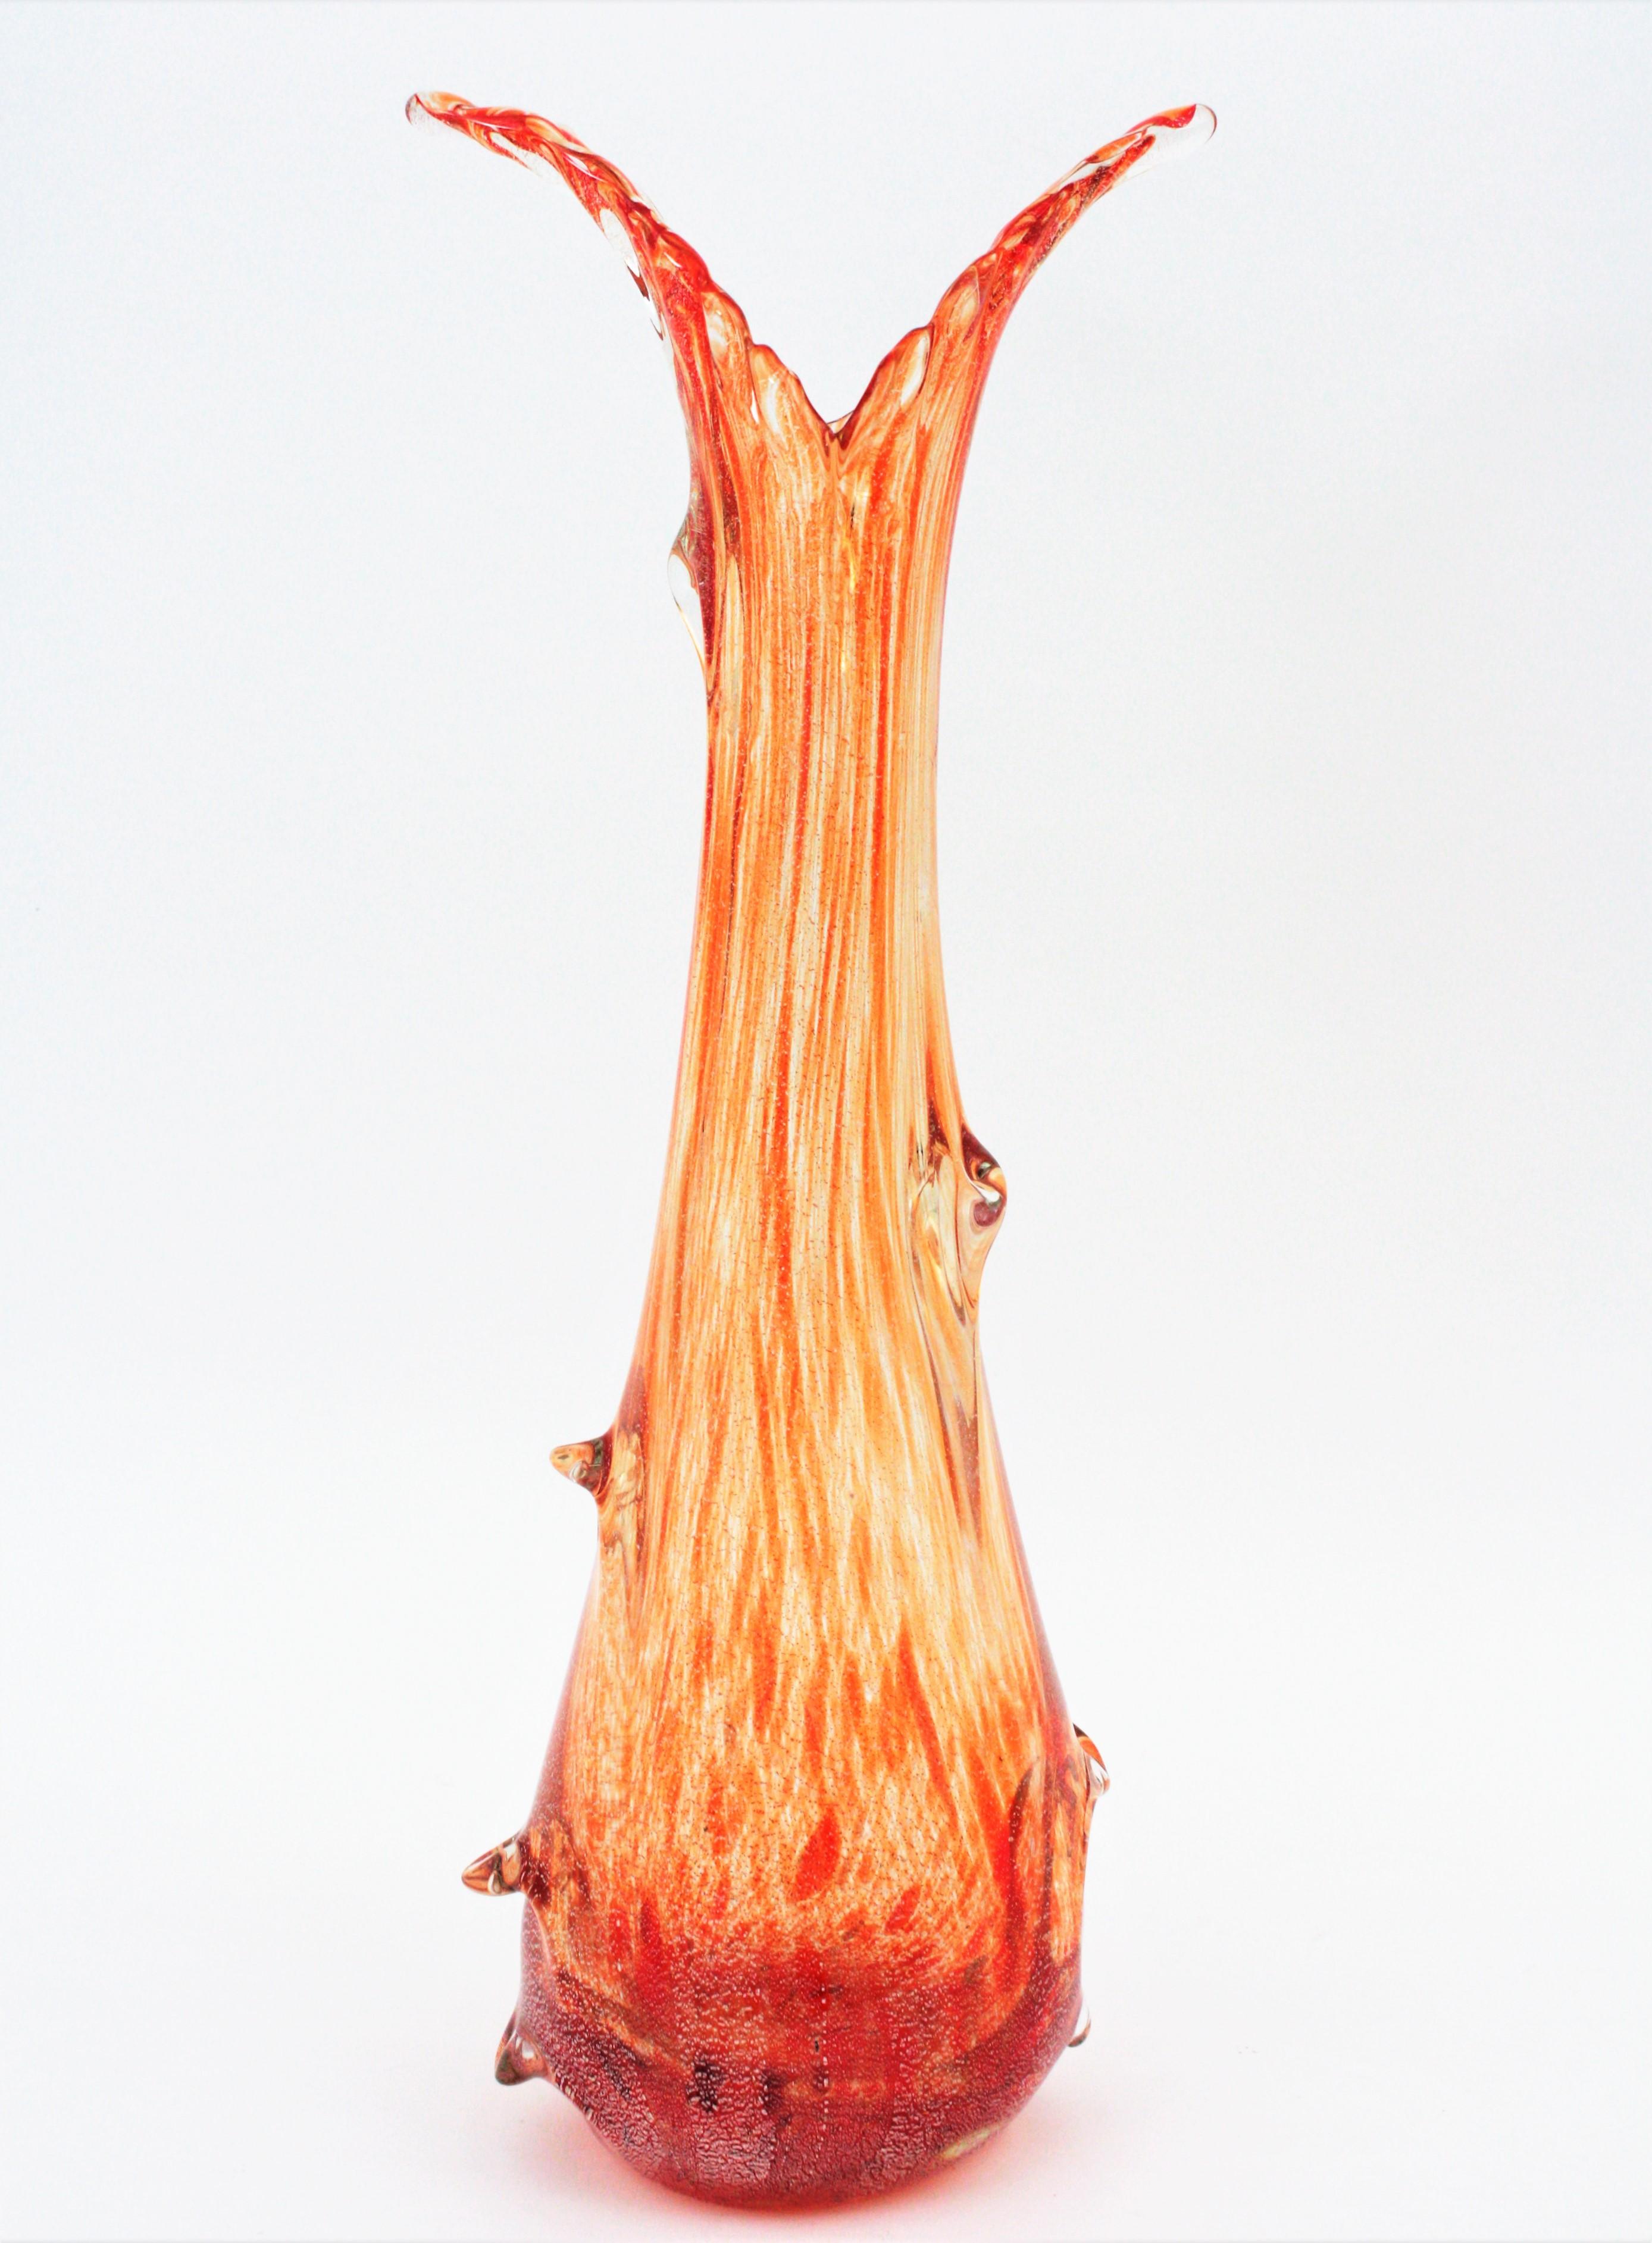 Outstanding hand blown Murano glass vase attributed to Seguso Vetri d´Arte with a beautiful decoration with orange stripes cased in clear glass and silver aventurine flecks. Murano, circa 1940.
The exterior part has large pulled glass decorations